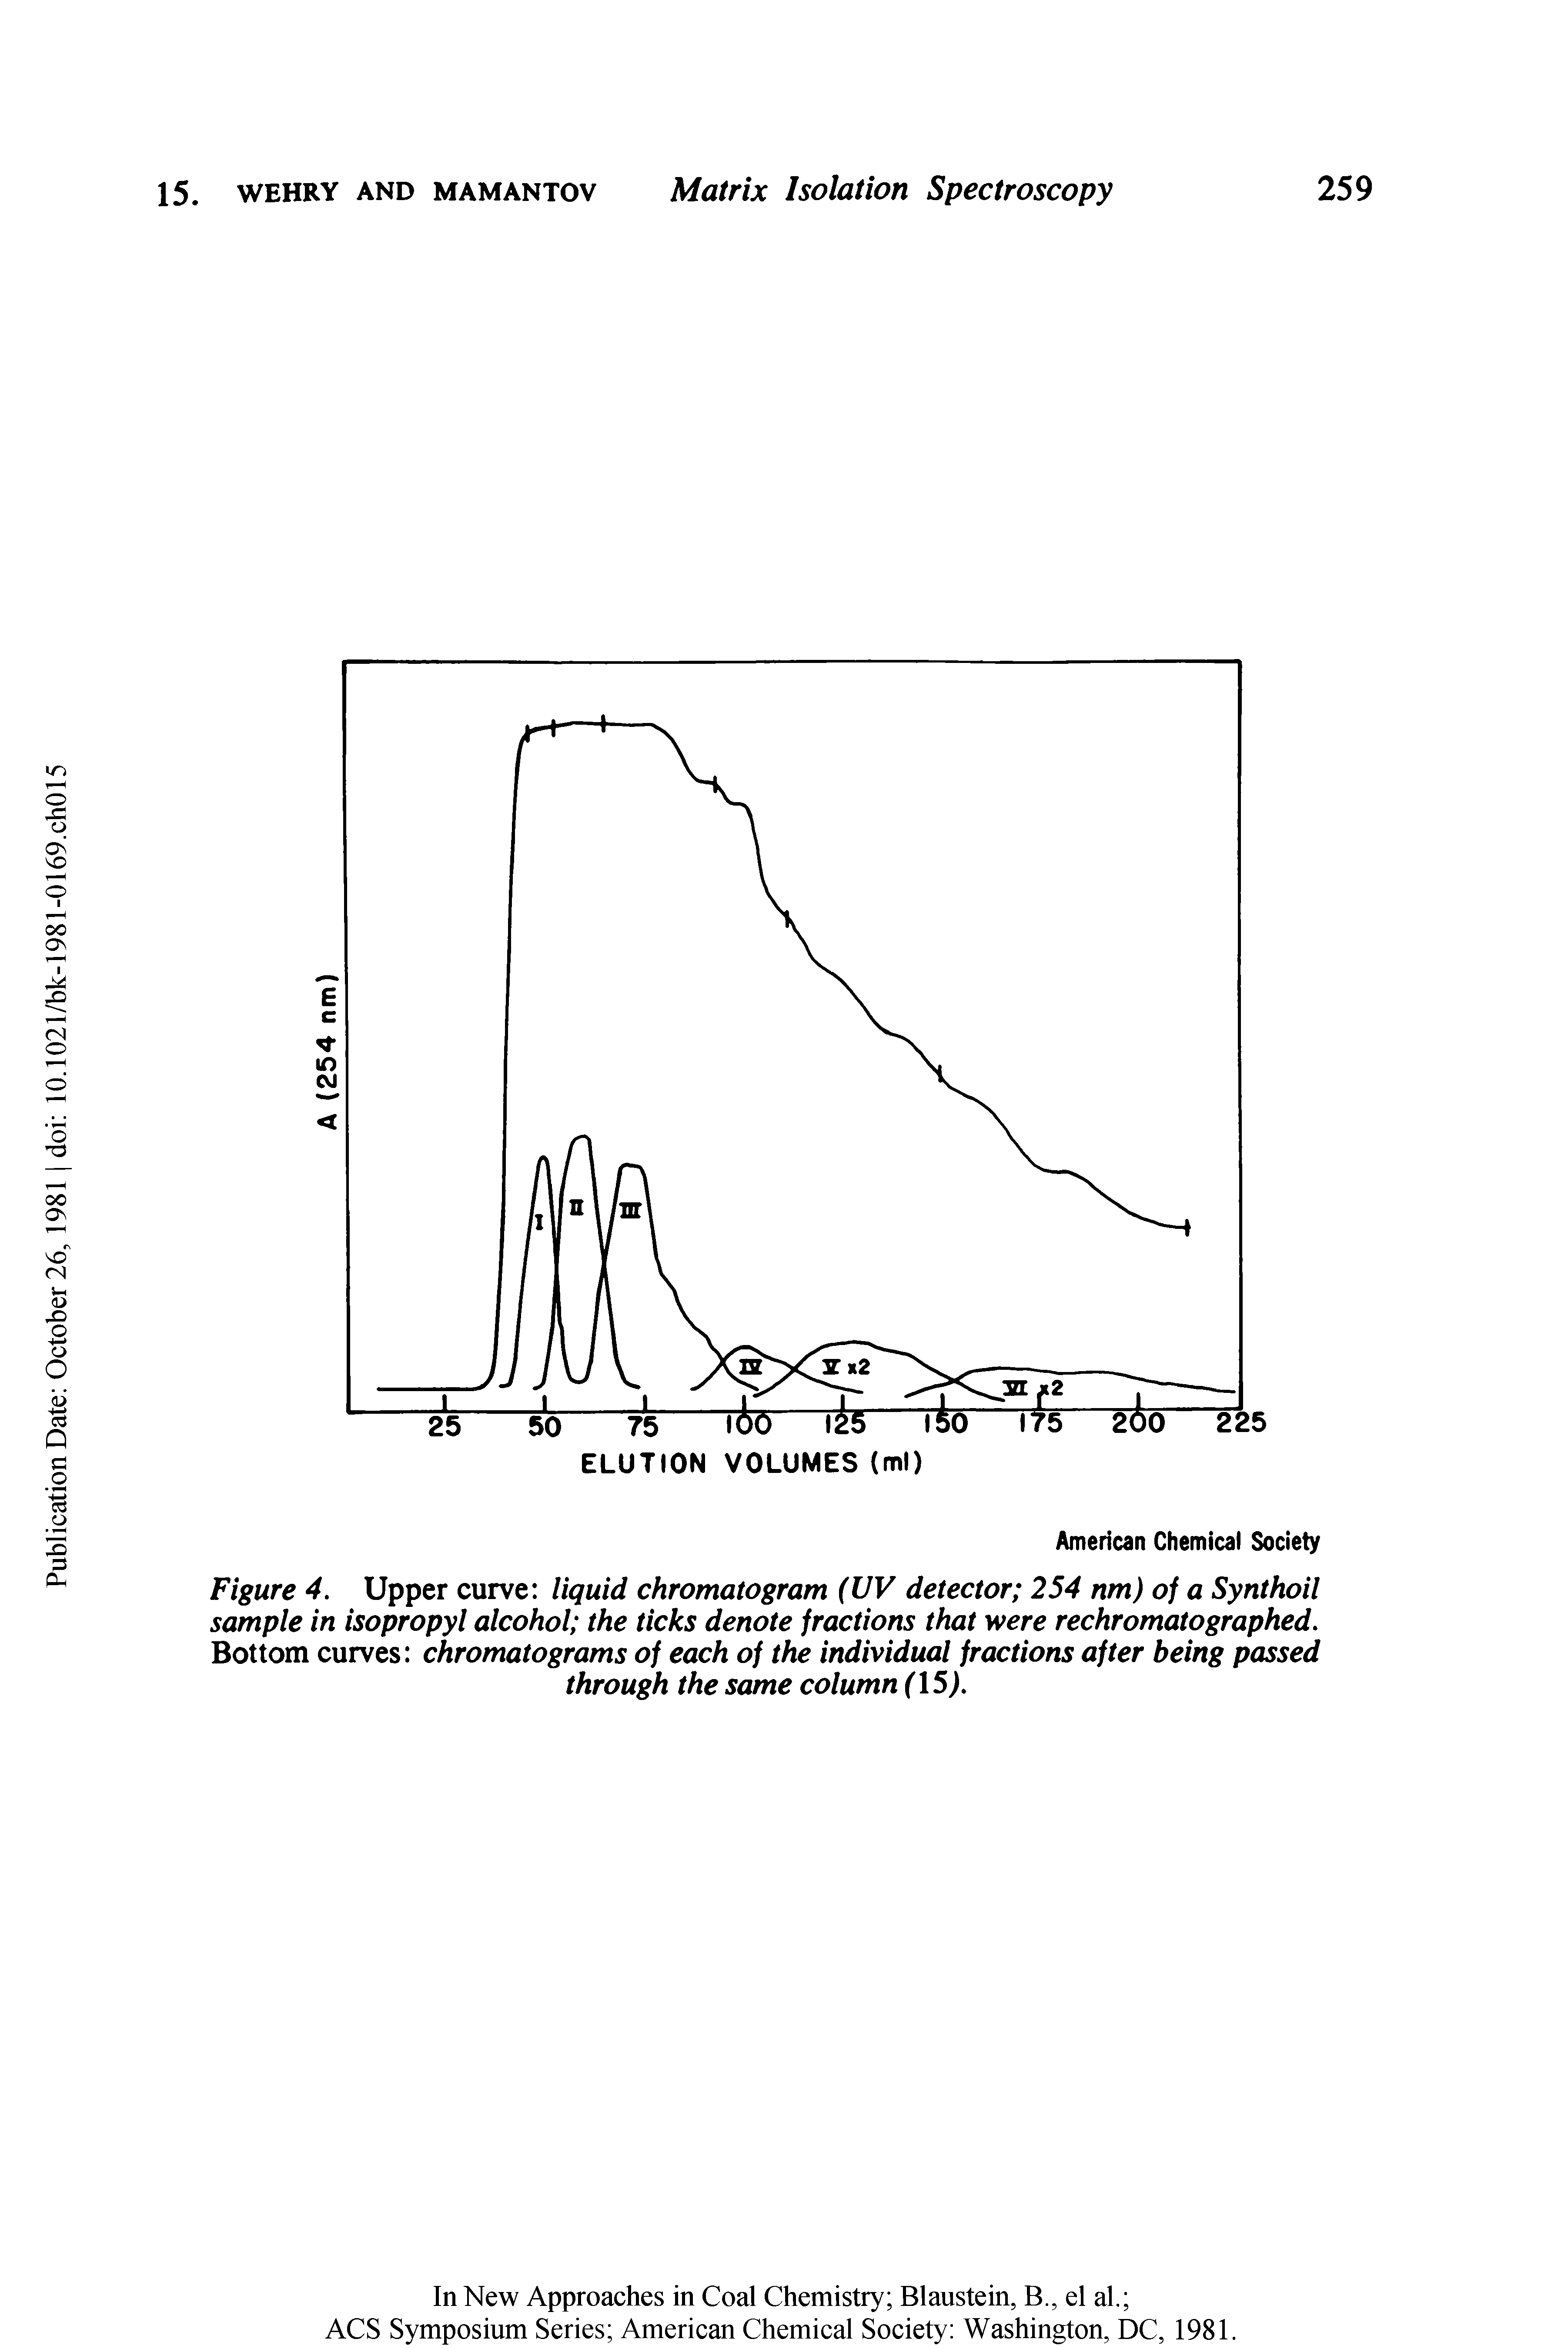 Figure 4. Upper curve liquid chromatogram (UV detector 254 nm) of a Synthoil sample in isopropyl alcohol the ticks denote fractions that were rechromatographed. Bottom curves chromatograms of each of the individual fractions after being passed through the same column (15J.